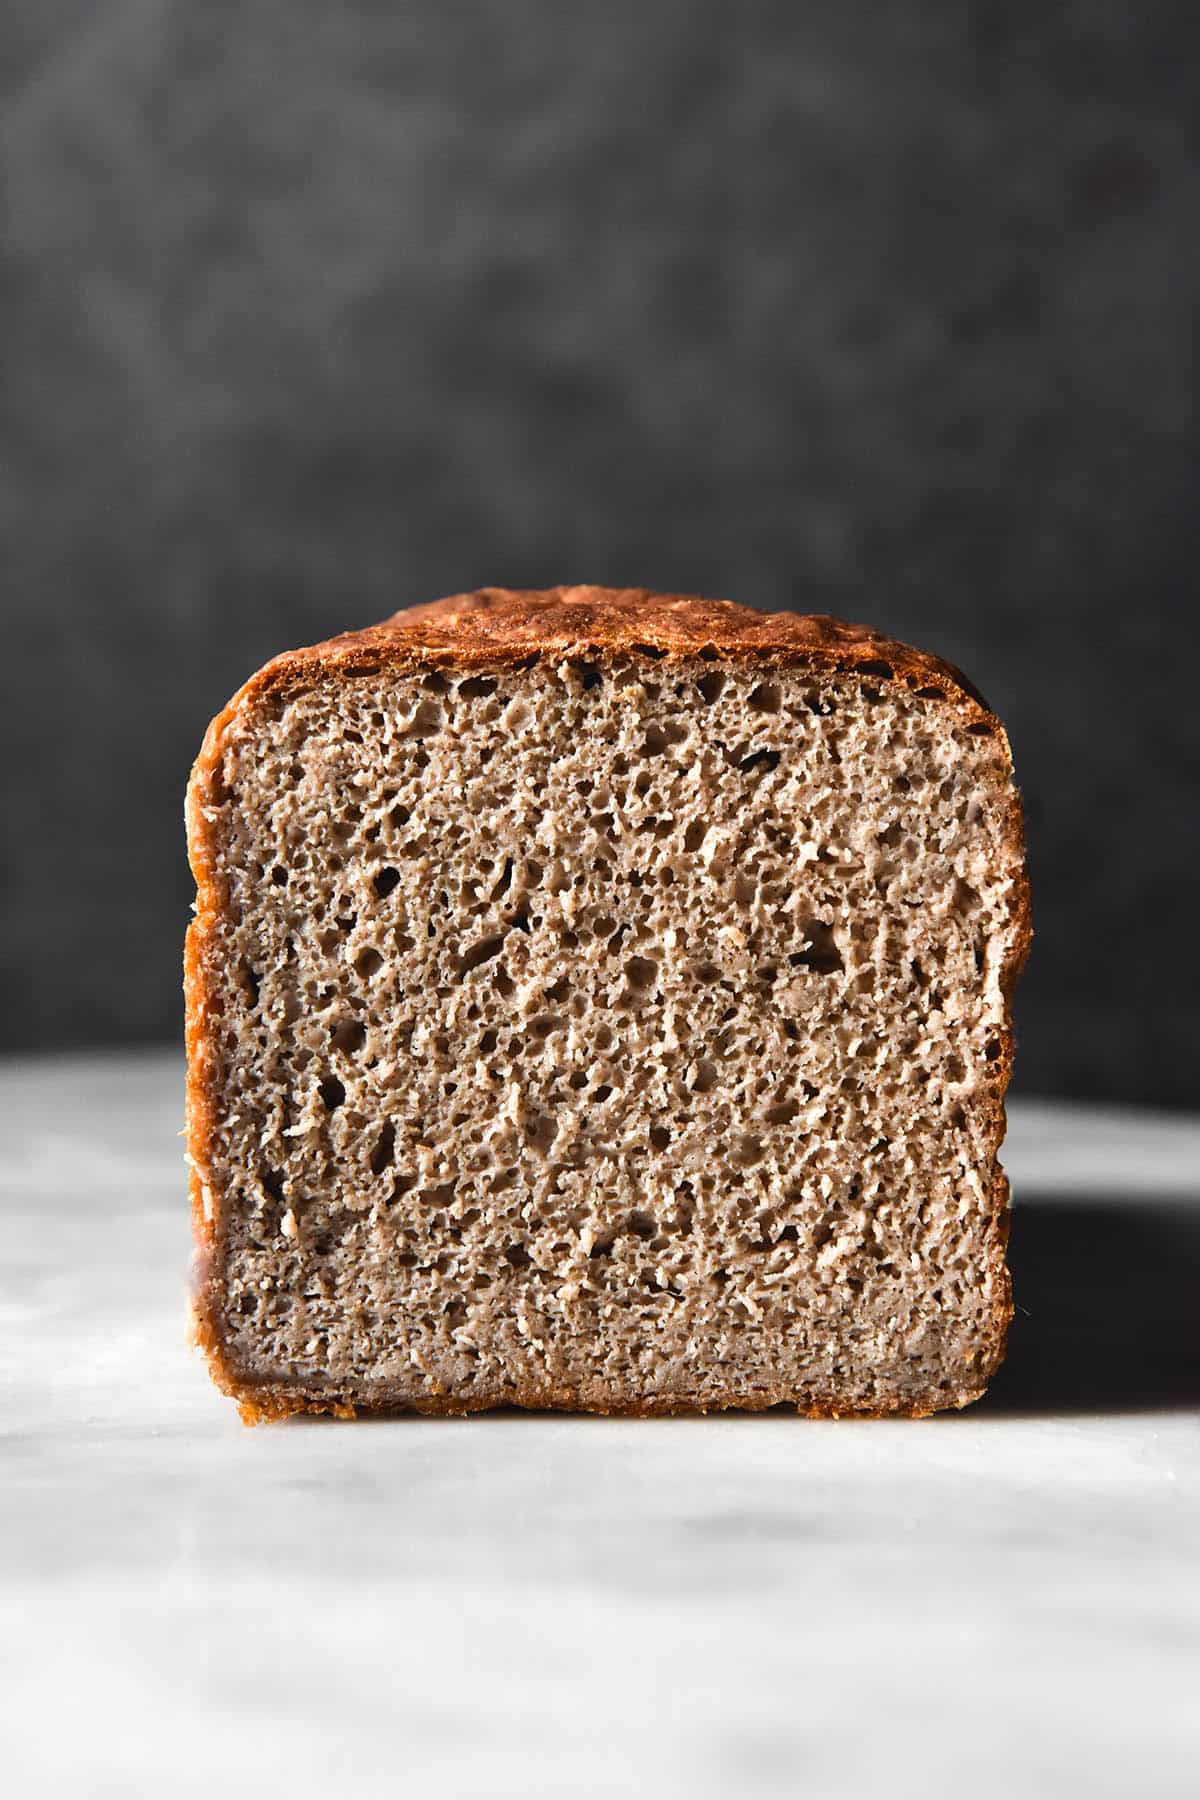 A side on image of the crumb of a gluten free, yeast free buckwheat bread recipe.